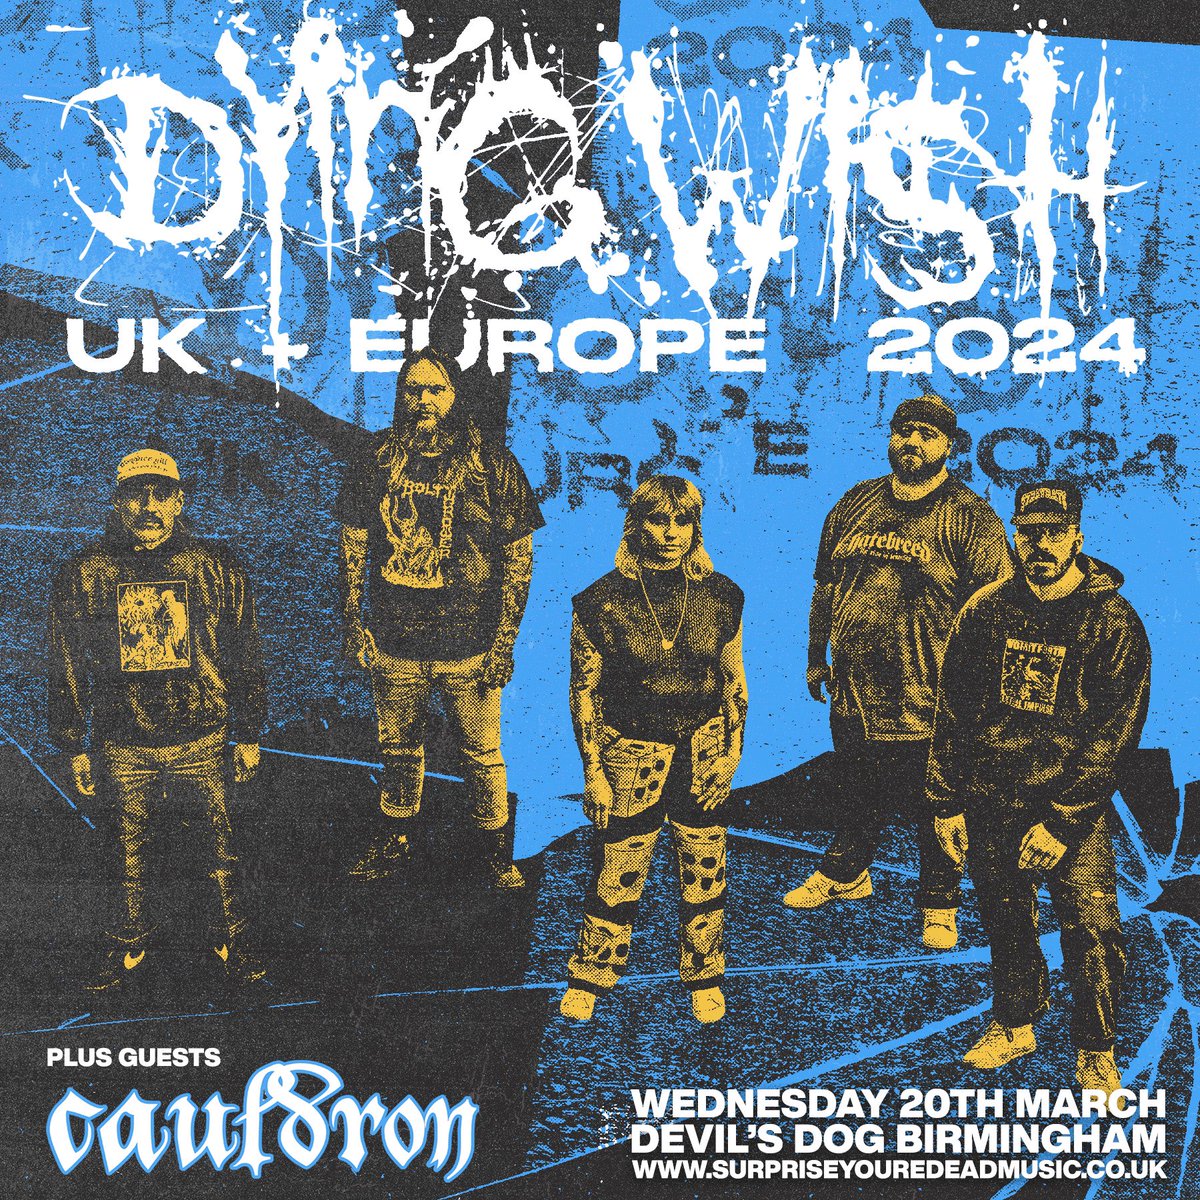 We’re playing with @dyingwishhc at their Birmingham headline in march at devils dog, don’t miss it. Little reminder that our shows with KMS are next week and tickets are still available at the link in our bio!